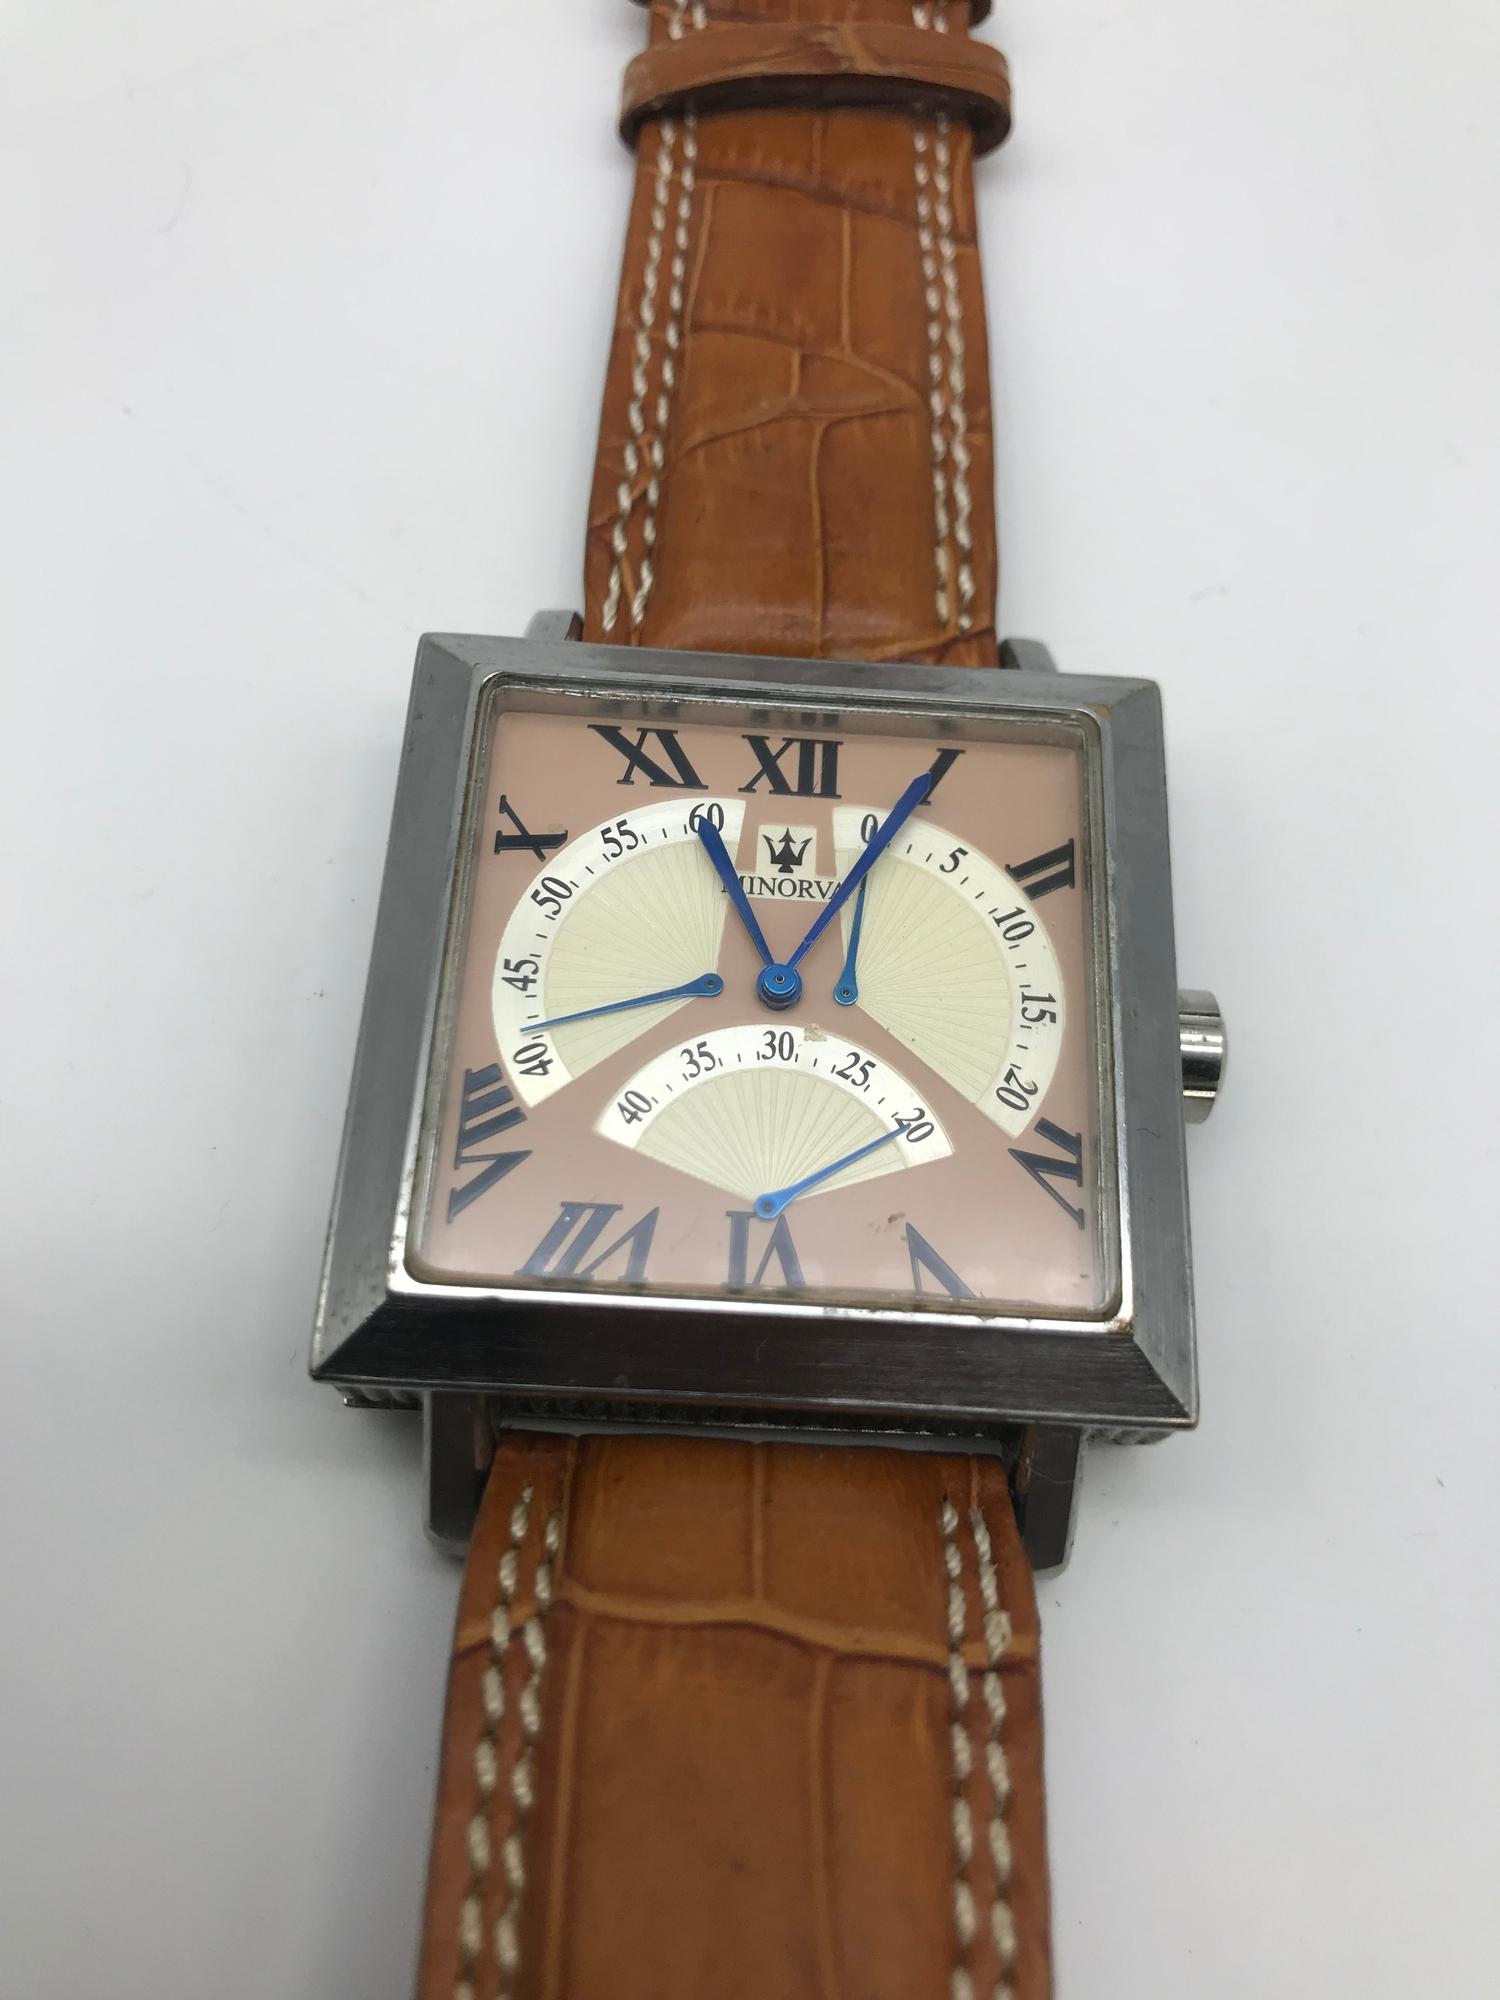 Minorva 3 flyback second hands automatic watch, Working - Image 2 of 3